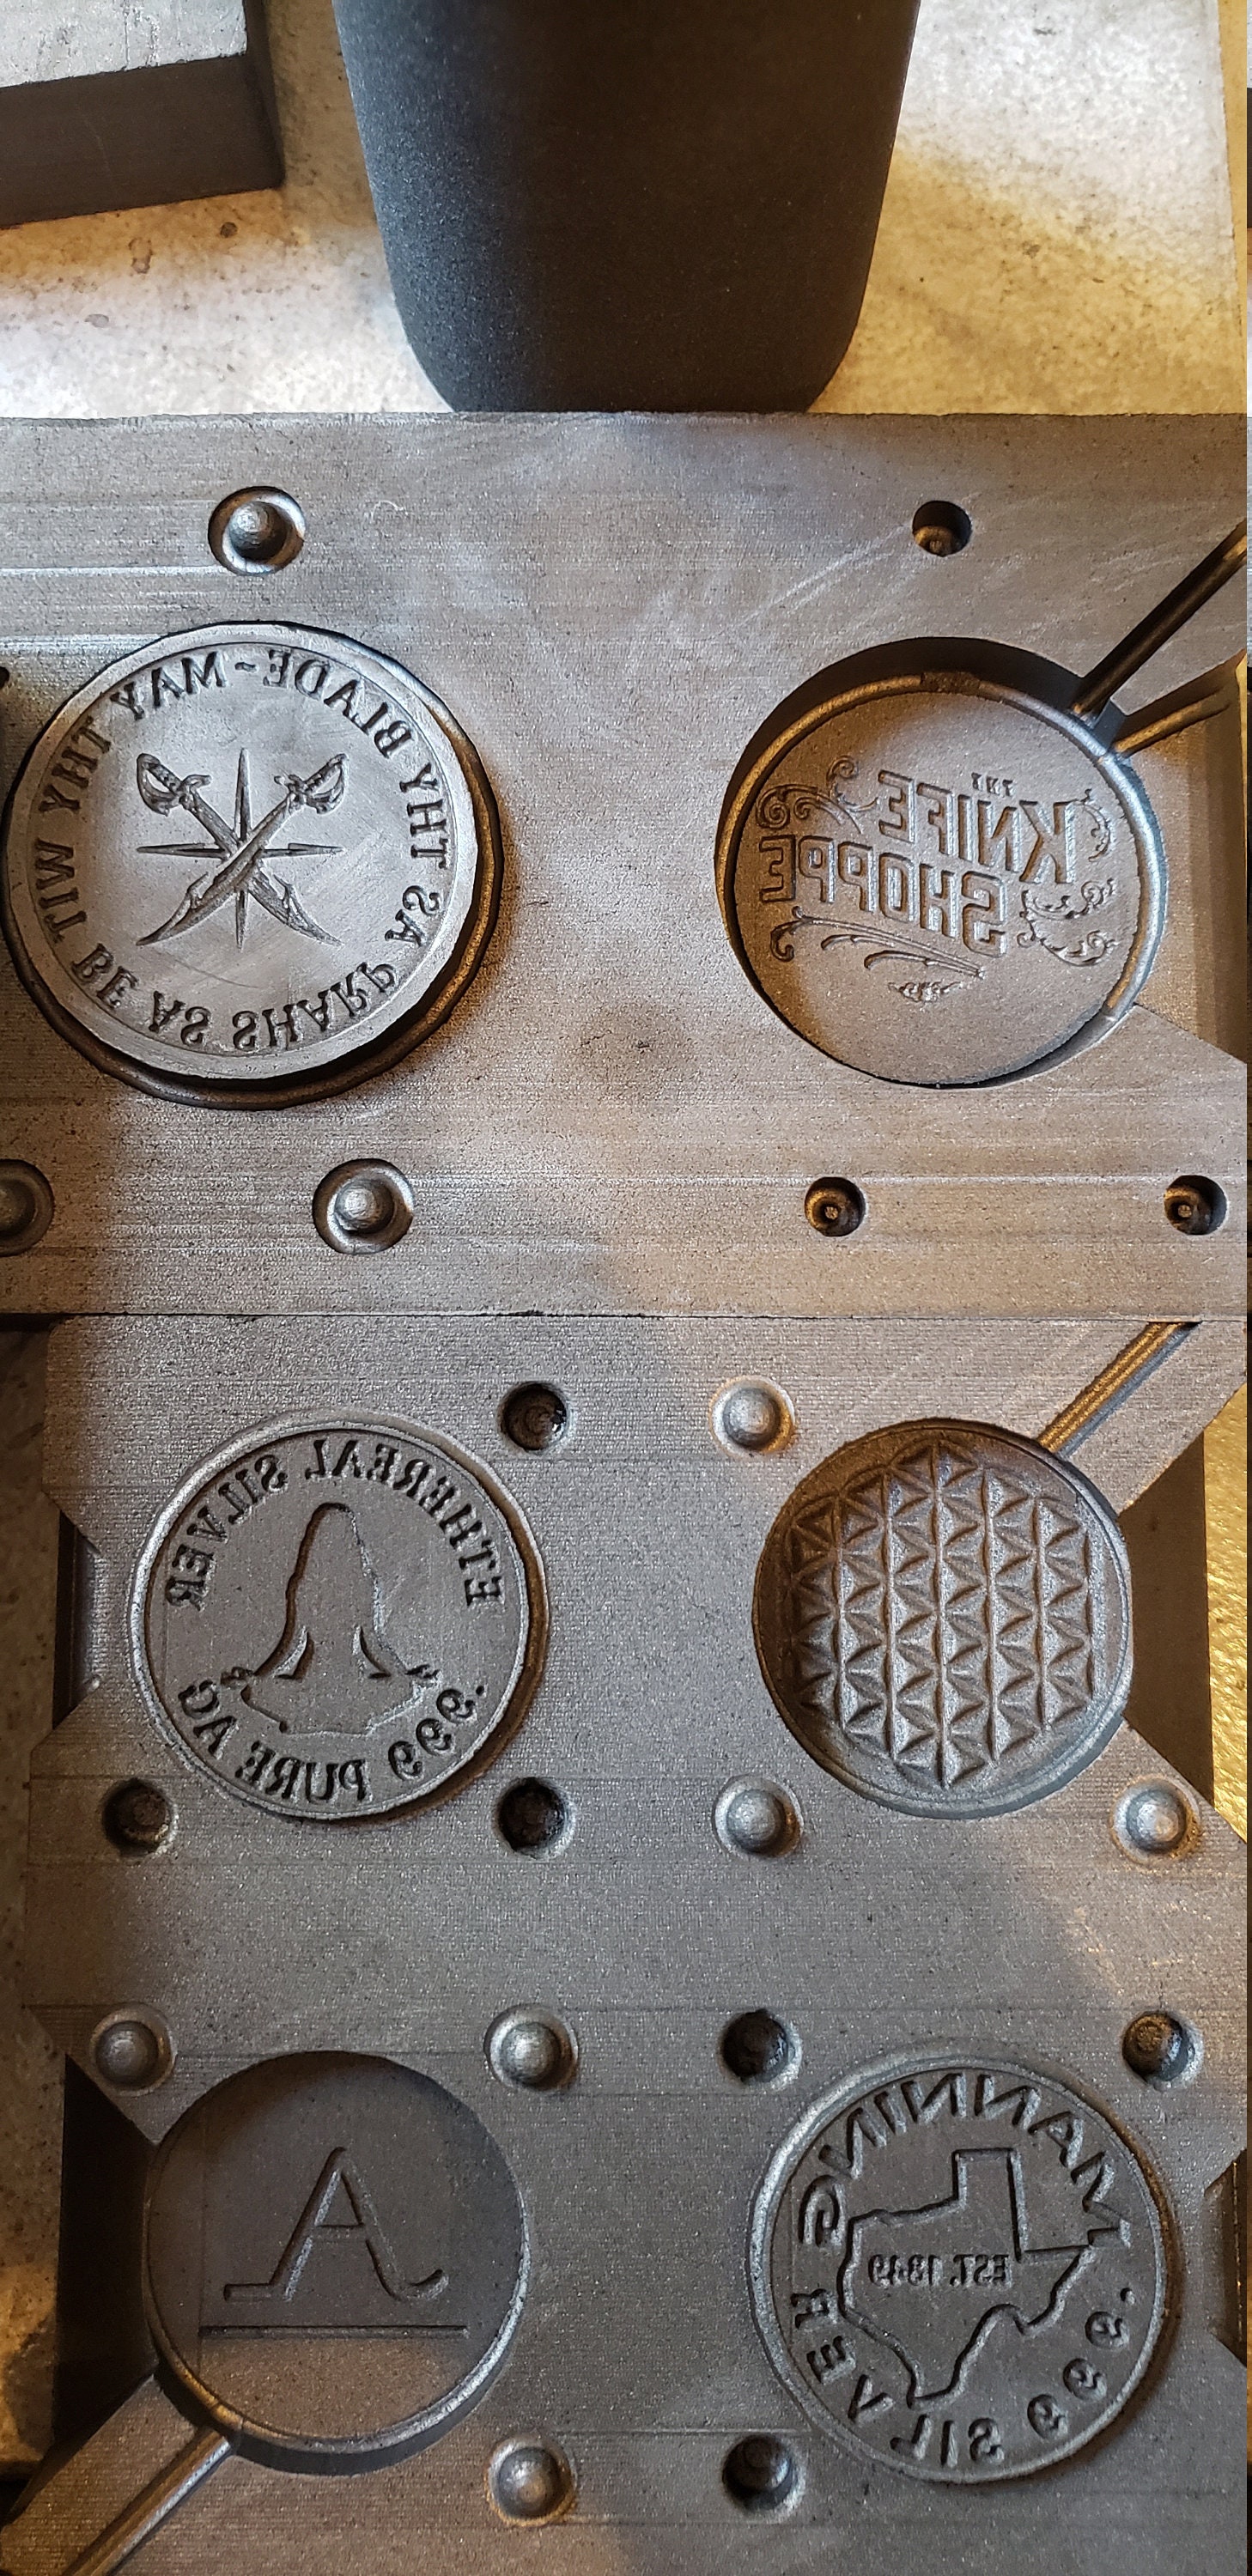 Graphite casting mold - Pokeball and Pika double sided coin mold!